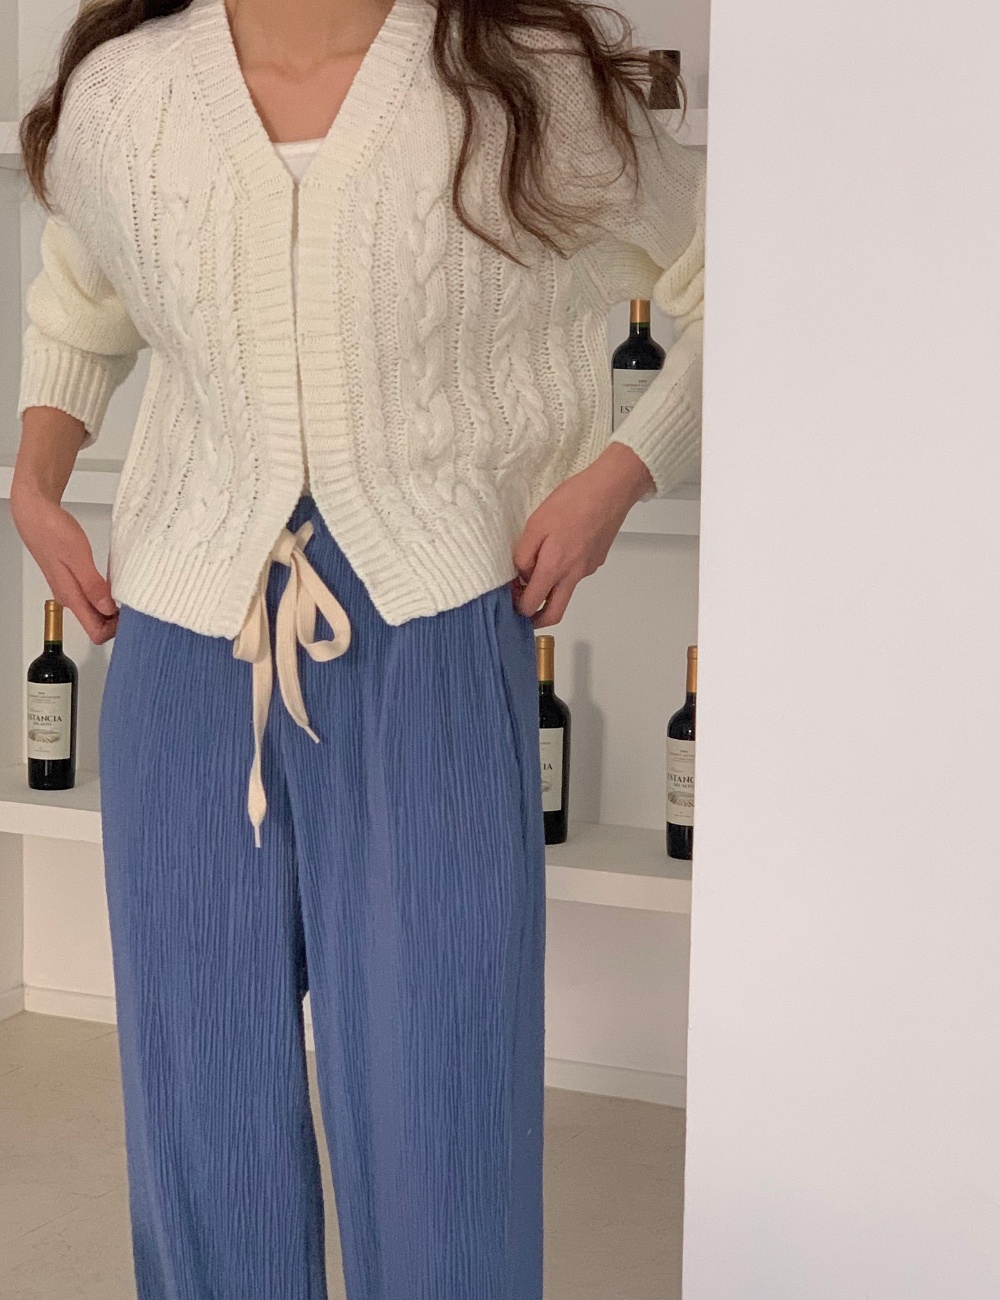 Chanelstyle lazy knitted tops twist short V-neck coat